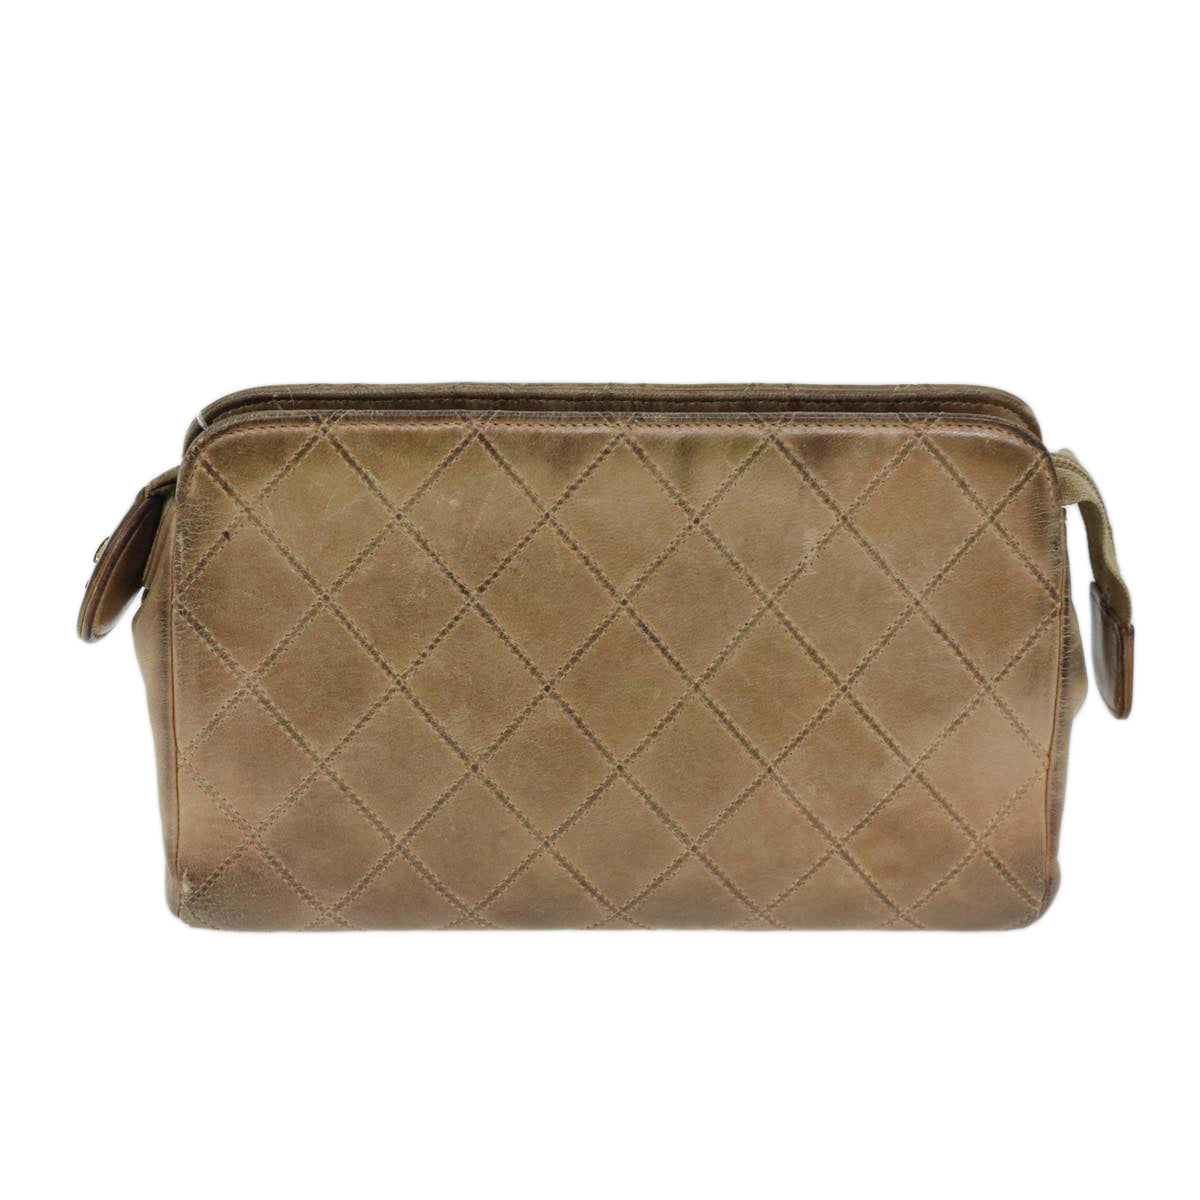 CHANEL Bicolole Pouch Leather Beige CC Auth bs13900